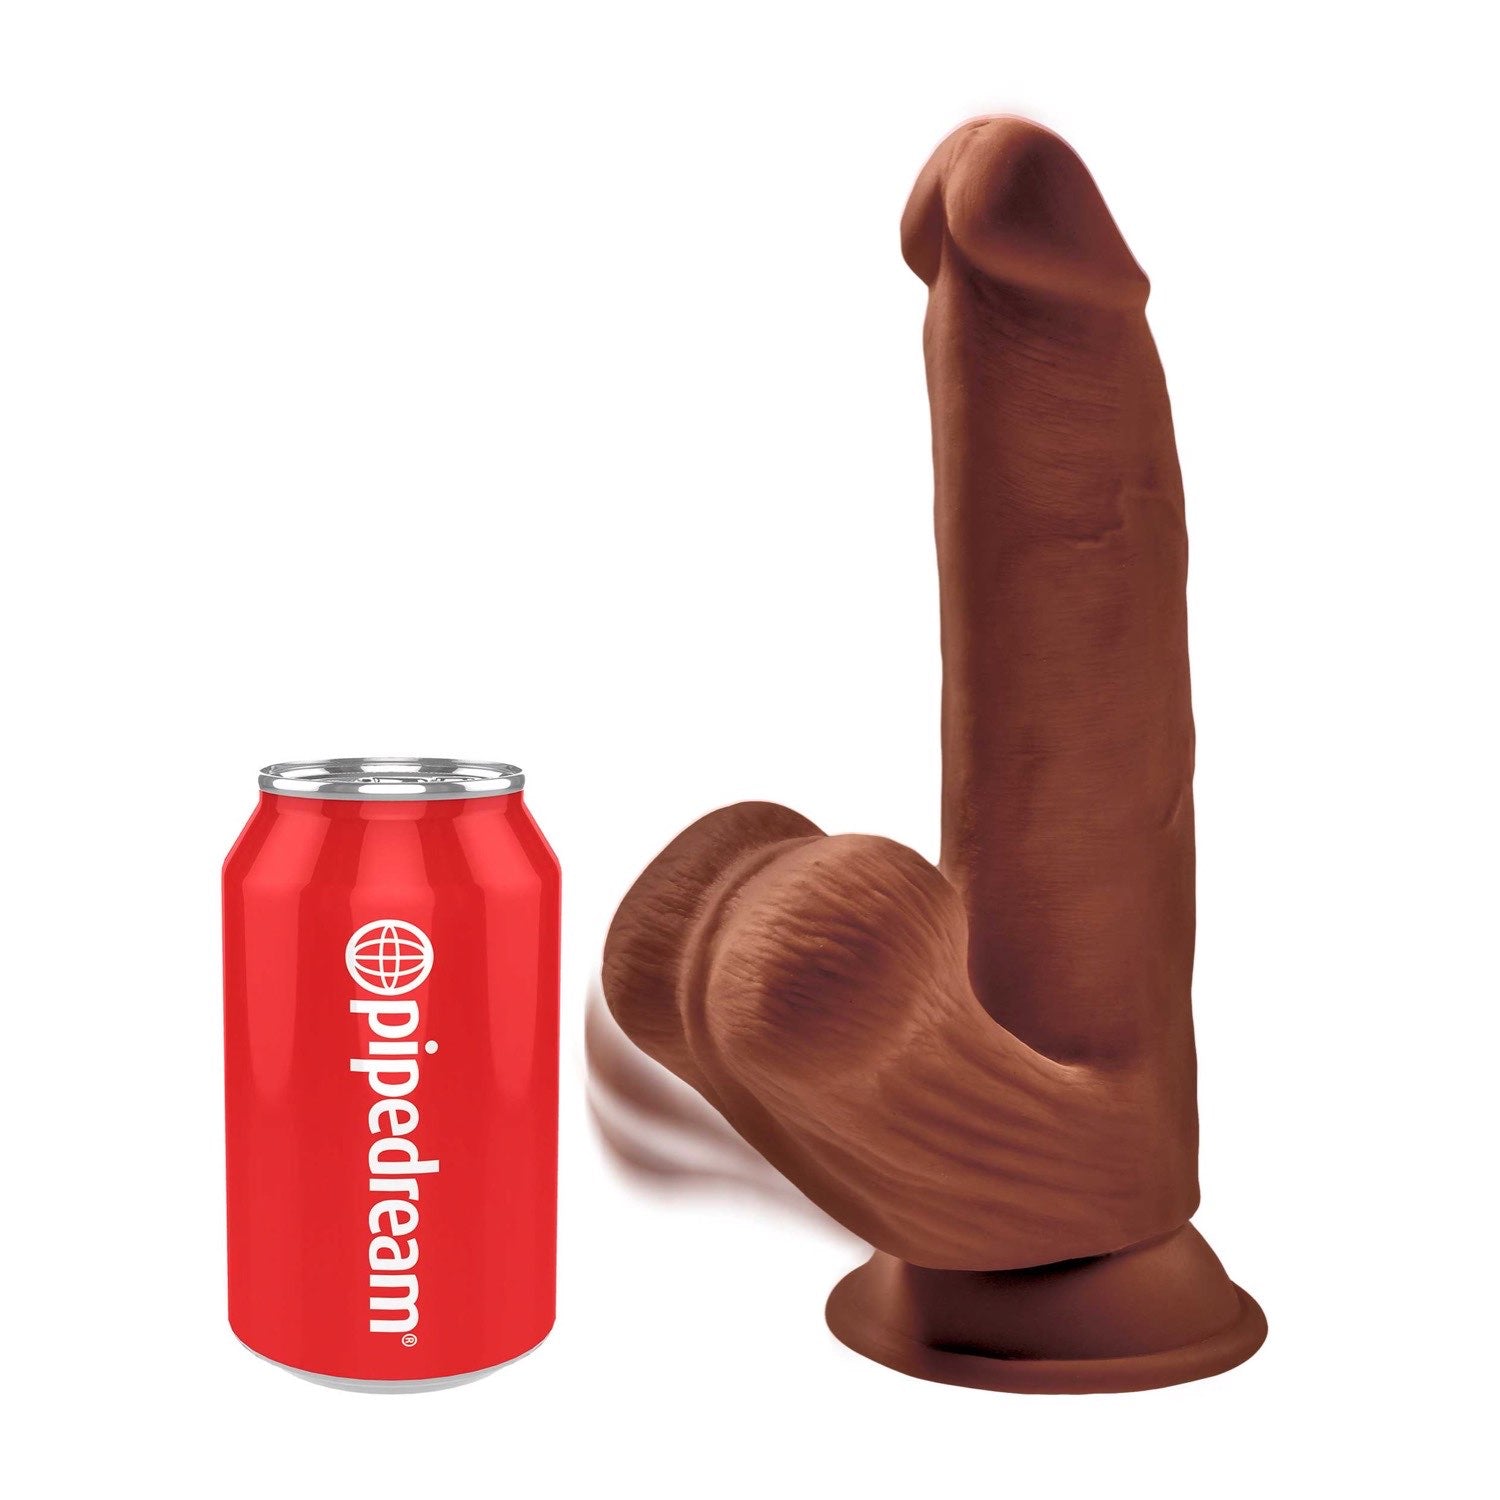 King Cock Plus 8&quot; 3D Cock with Swinging Balls - Brown 20.3 cm Dong by Pipedream